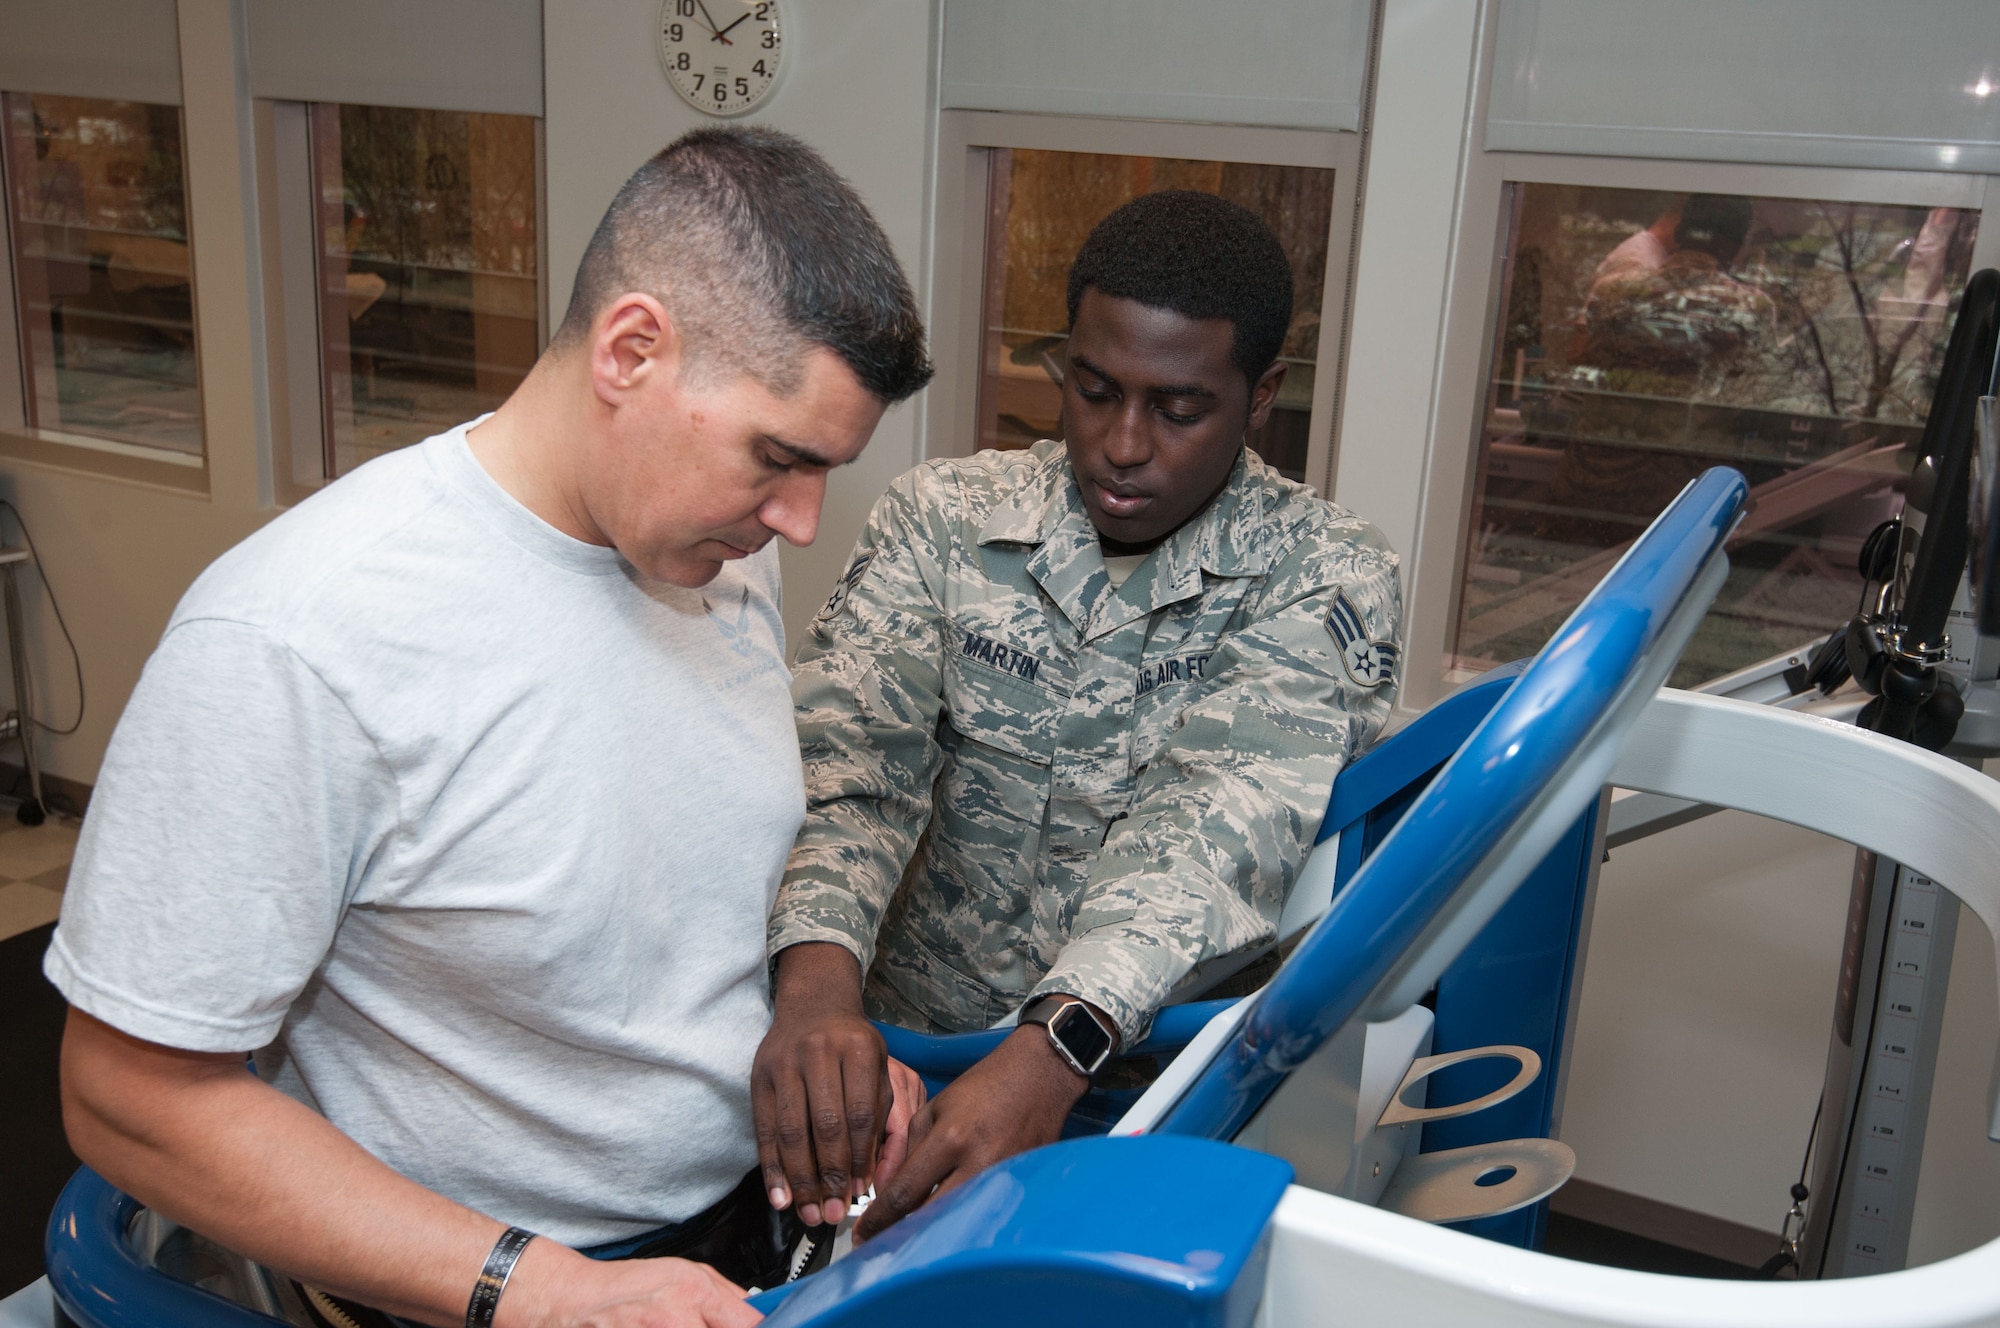 Col. Eric Shafa, 42d Air Base Wing commander, learns how to operate an Anti Gravity Treadmill during a visit to the 42d Medical Operations Squadron on Feb 21, 2017.  Senior Airman Donald Martin walked the command team through various exercises his team does daily in the physical therapy section.  (US Air Force photo by Bud Hancock)